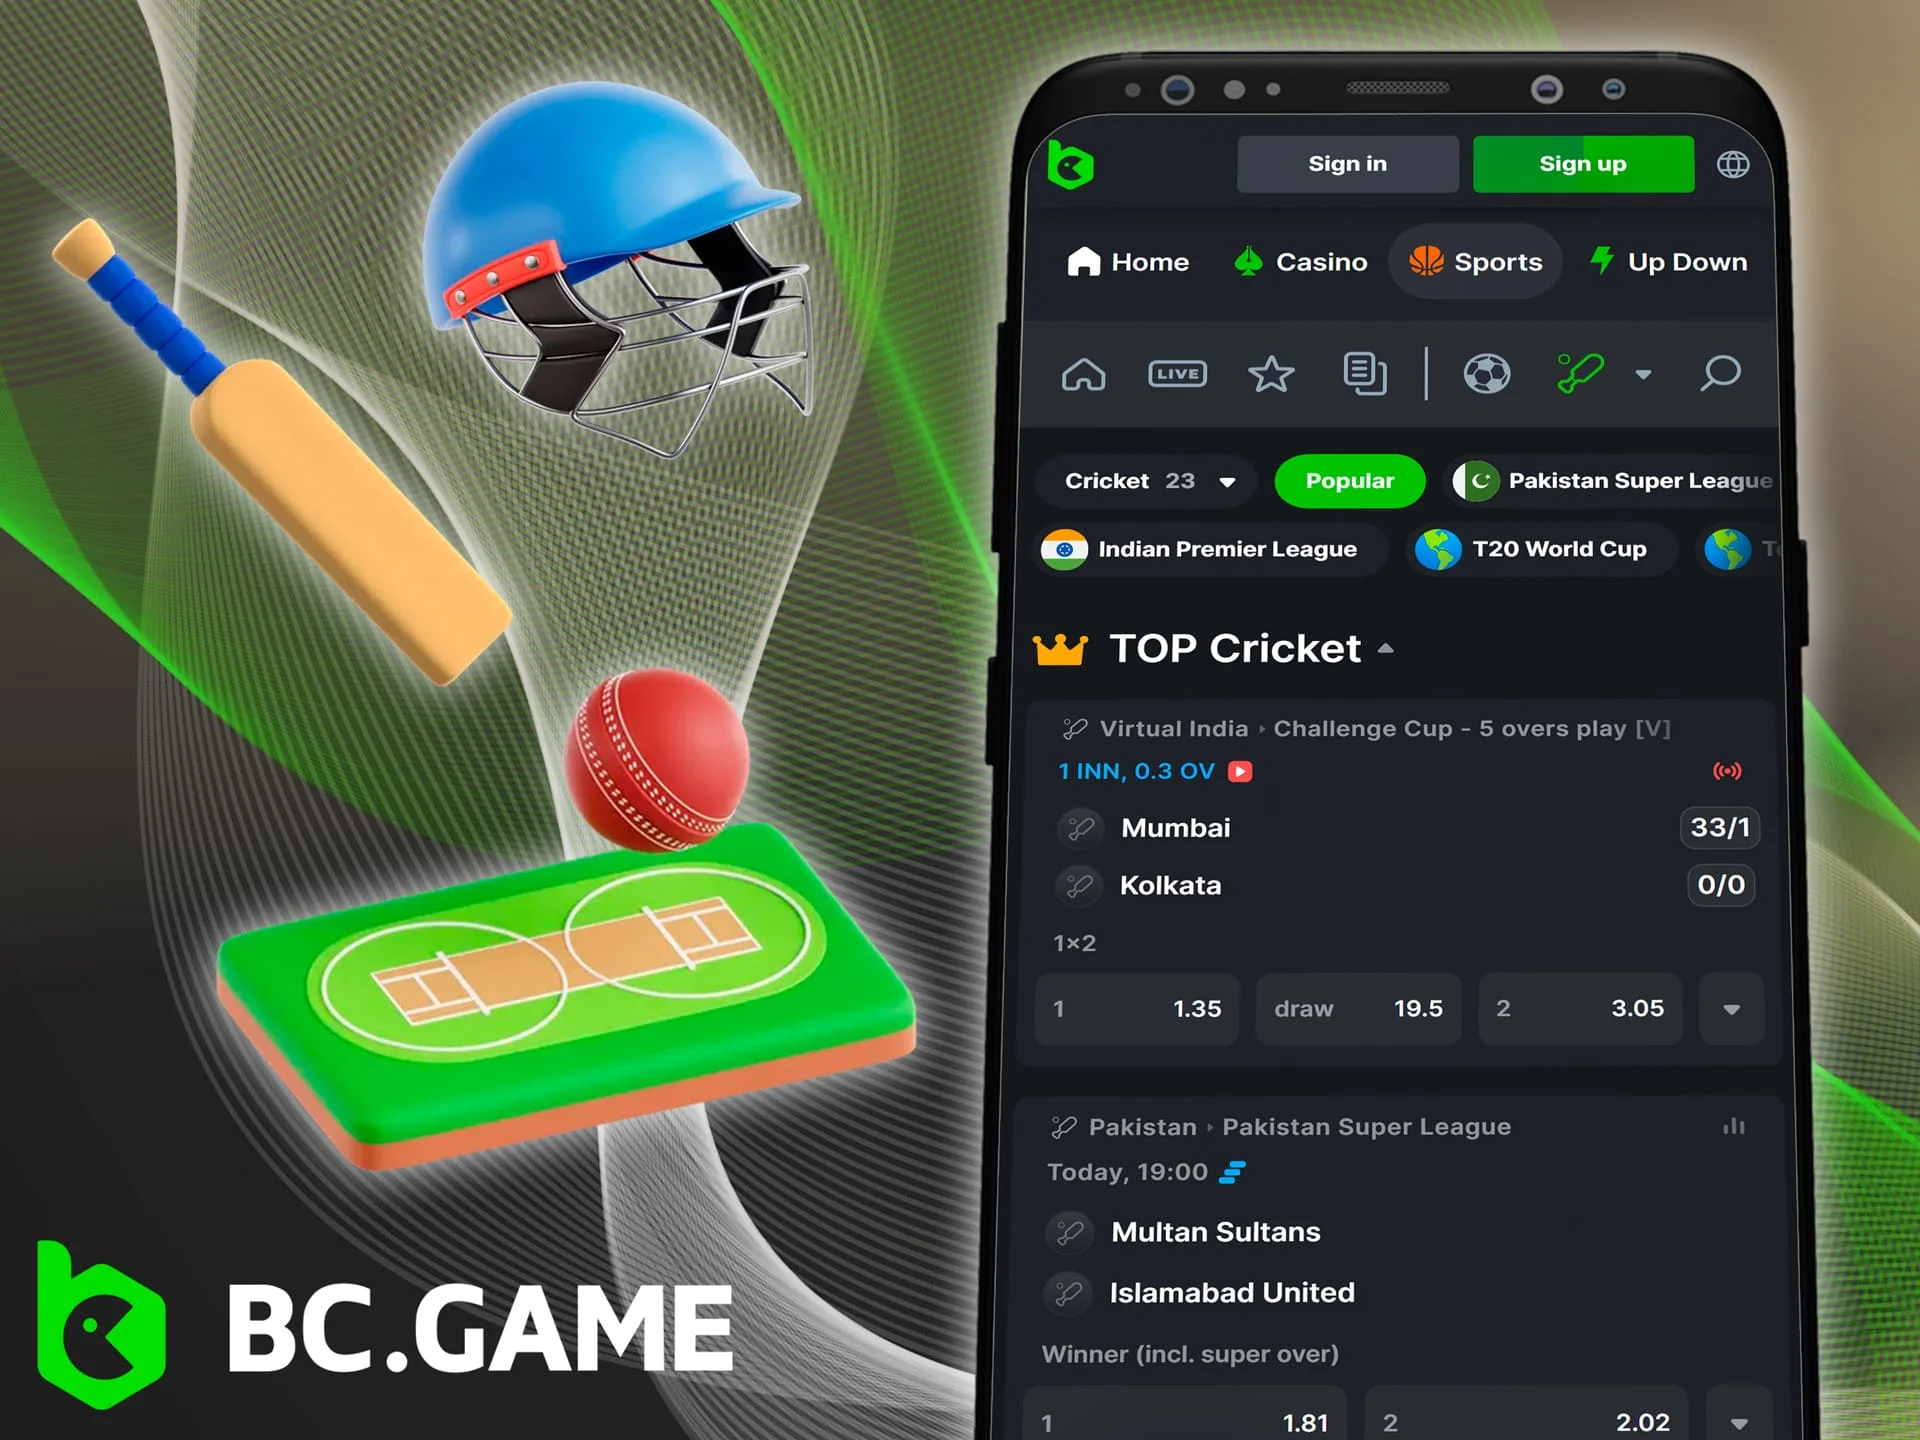 Bet on cricket anytime and anywhere with the BC Game mobile app.